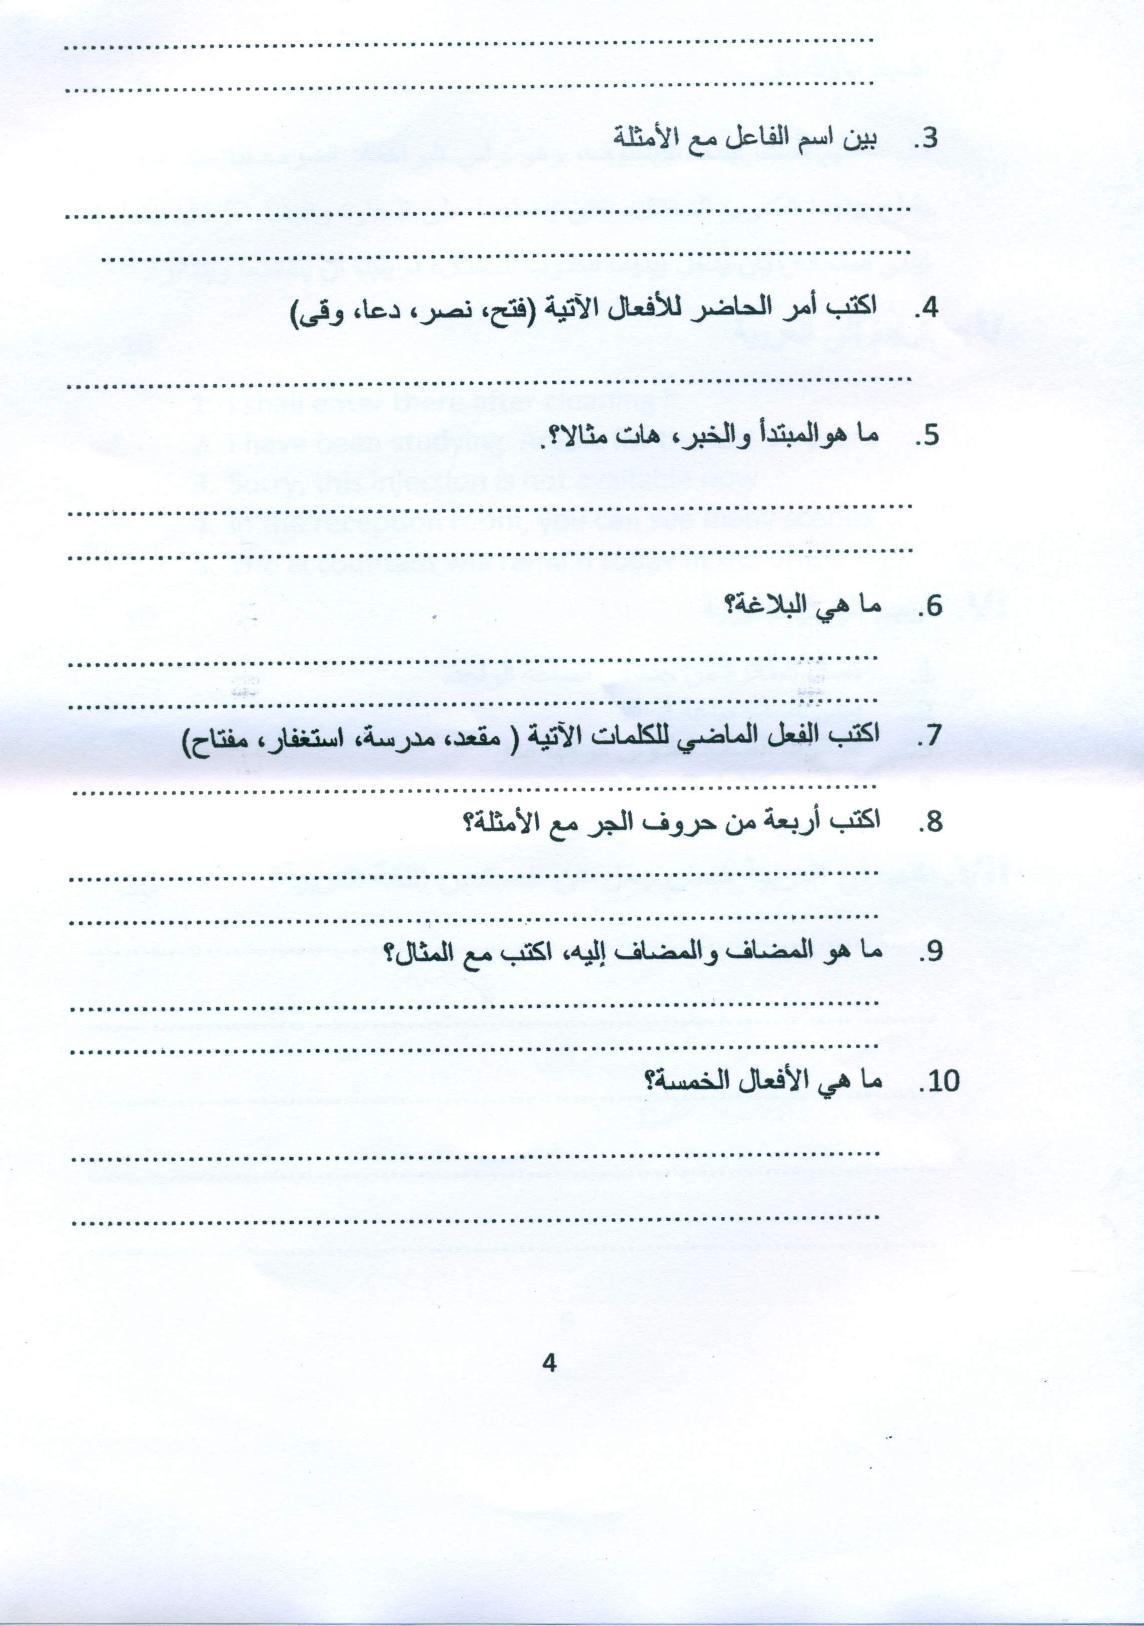 SSUS Entrance Exam M.A ARABIC 2015 Question Paper - Page 4